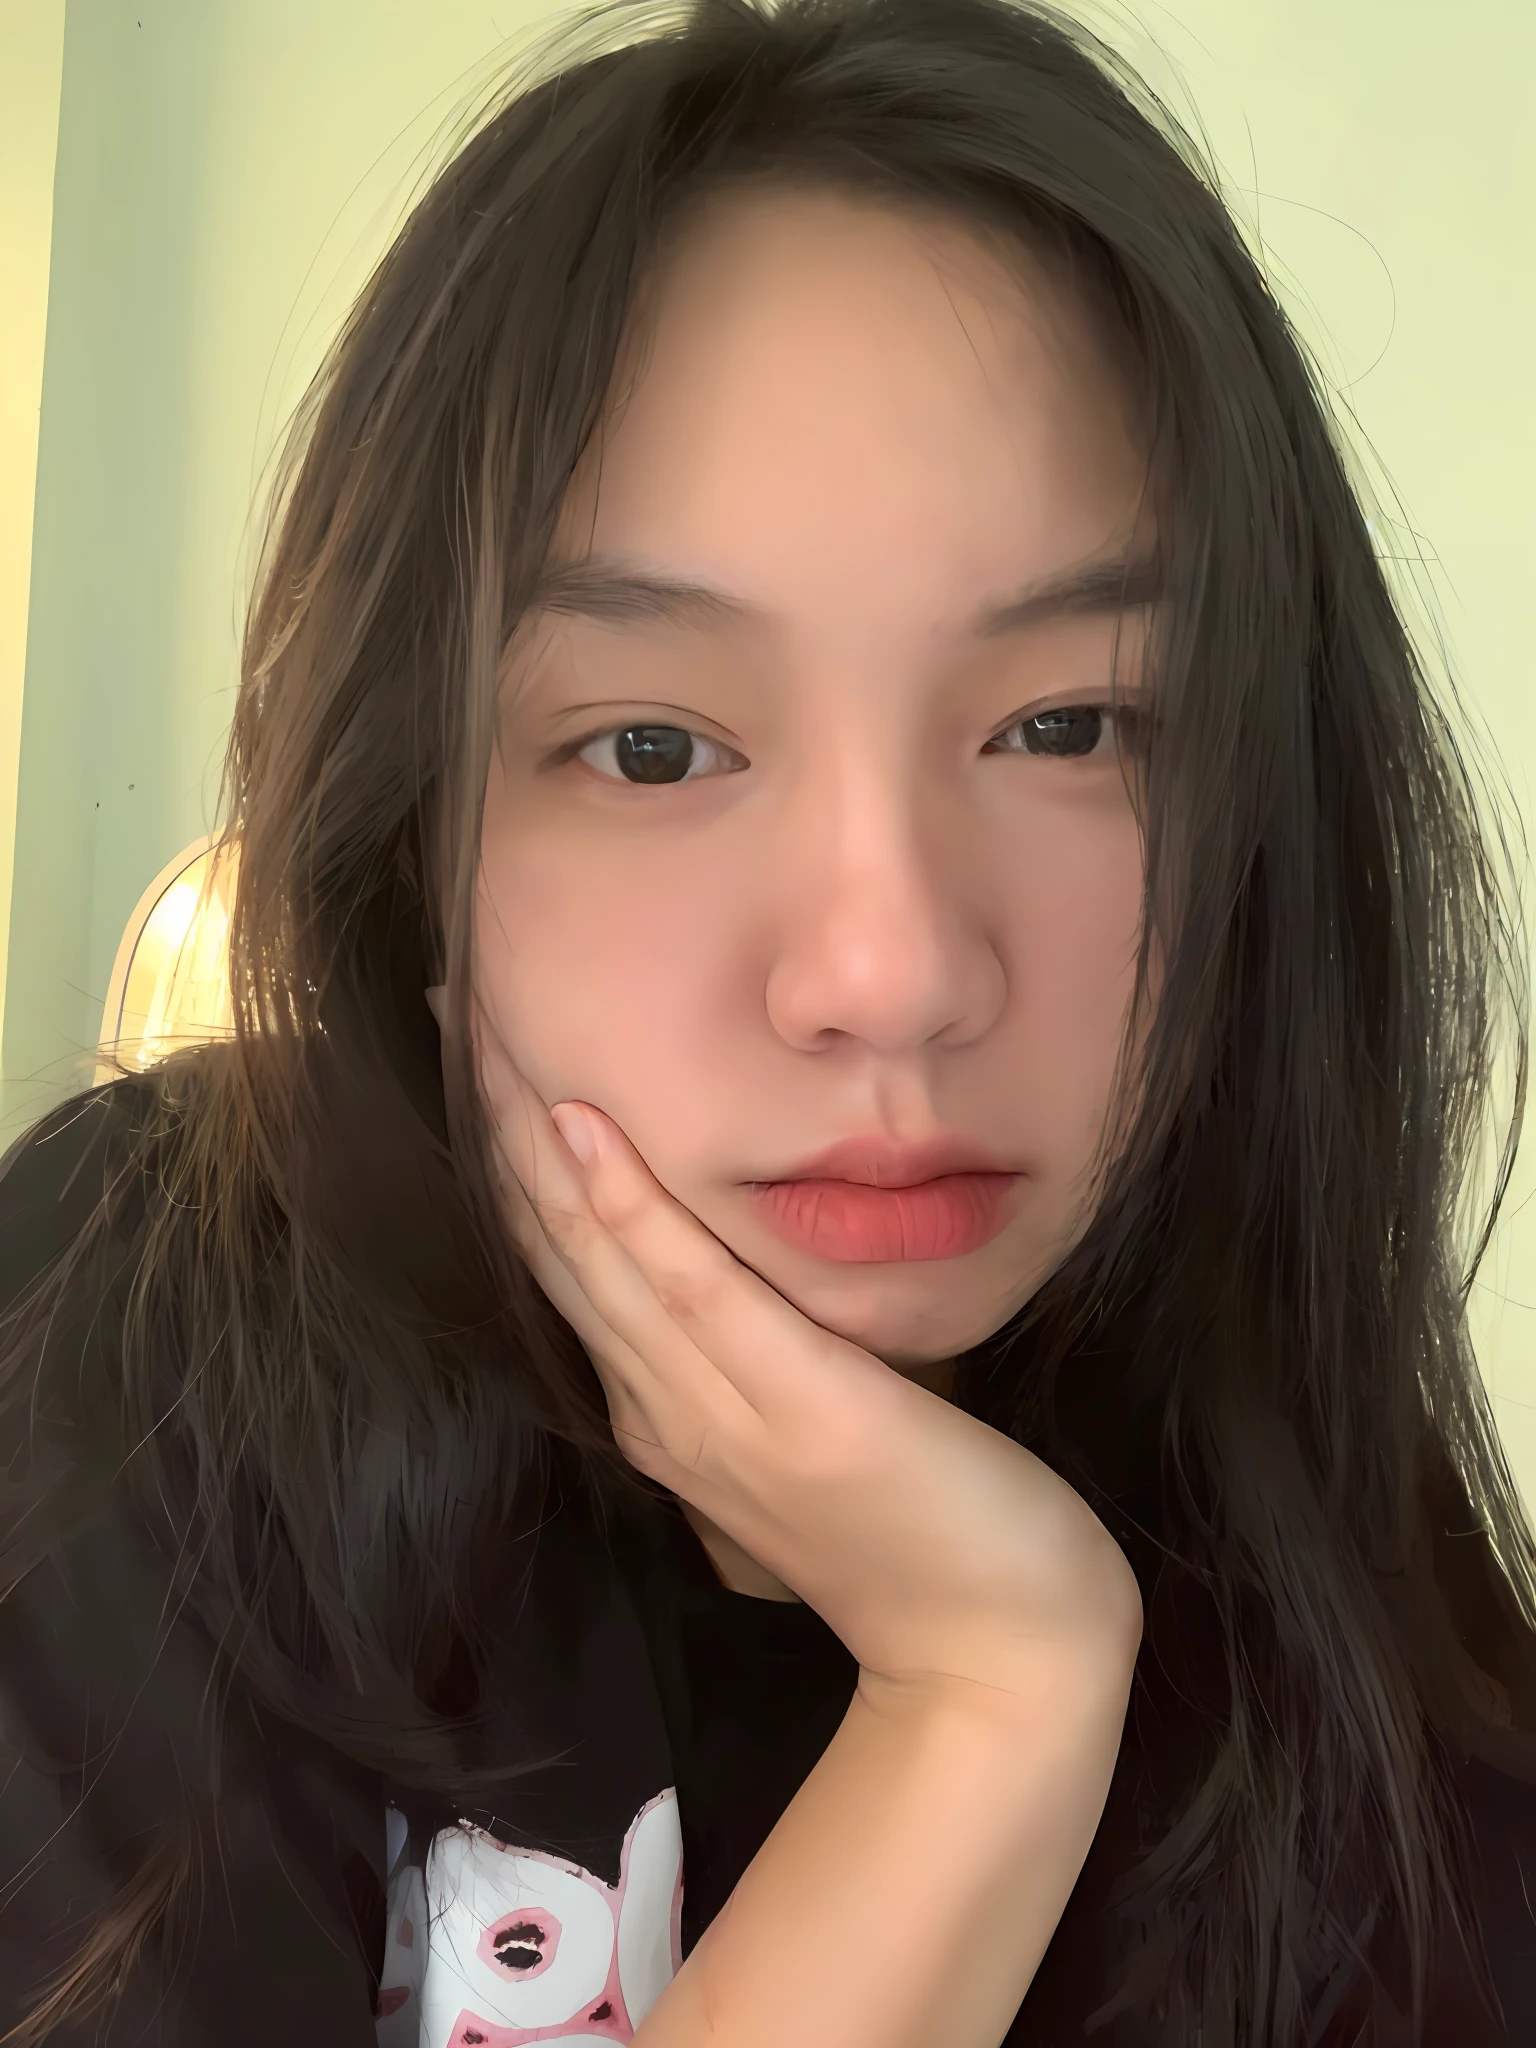 there is a woman with long hair and a black shirt posing for a picture, south east asian with round face, asian face, without makeup, with round face, pale round face, headshot profile picture, young cute wan asian face, small heart - shaped face, soft round face, face picture, small round face, clear cute face, with round cheeks